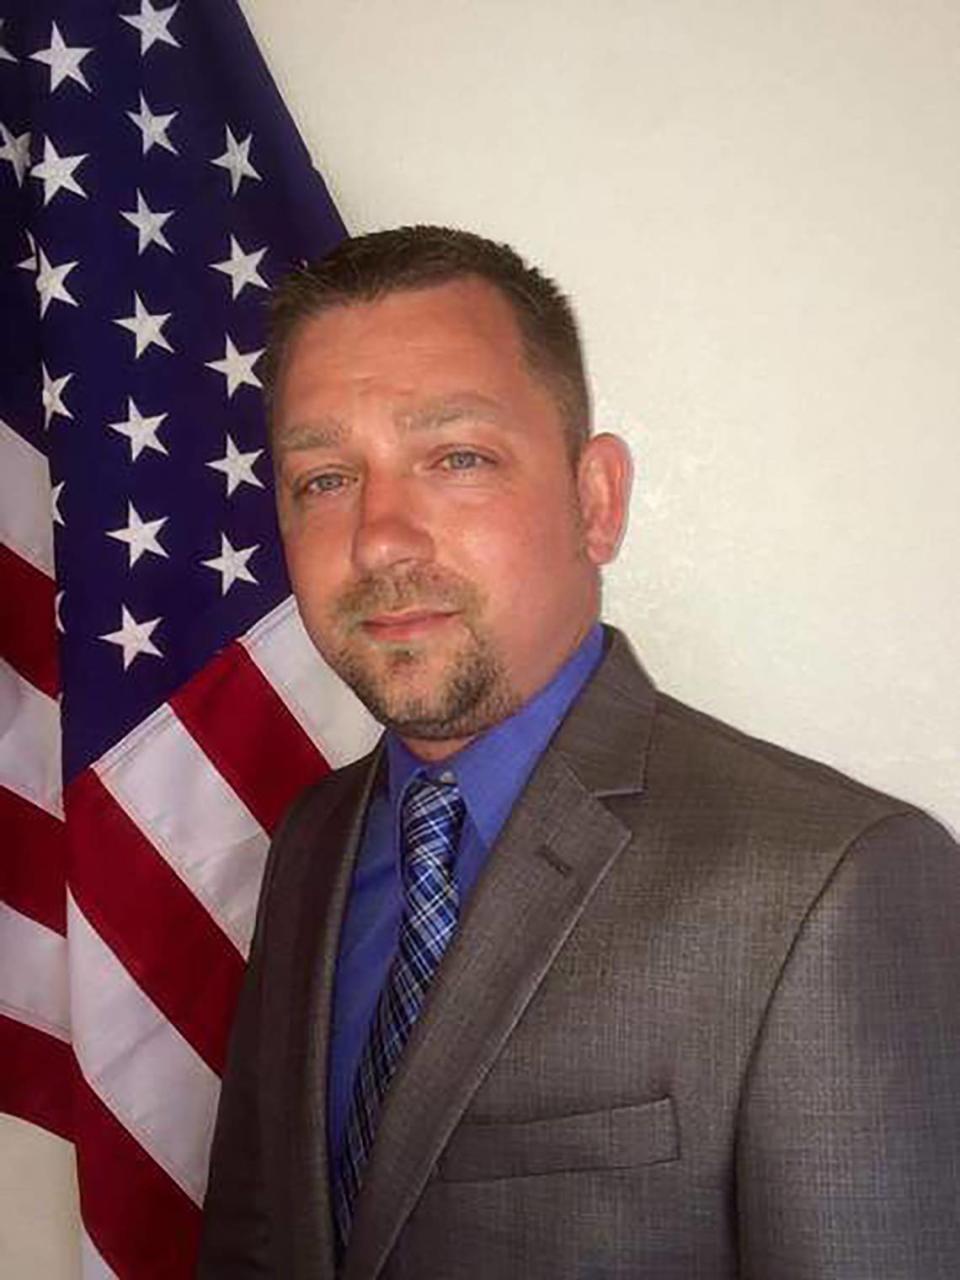 Former Lyon County Deputy Sheriff Heath Samuels. The Kansas Court of Appeals found Samuels violated a resident’s Fourth Amendment rights during a search of a rental house in Emporia in 2016.